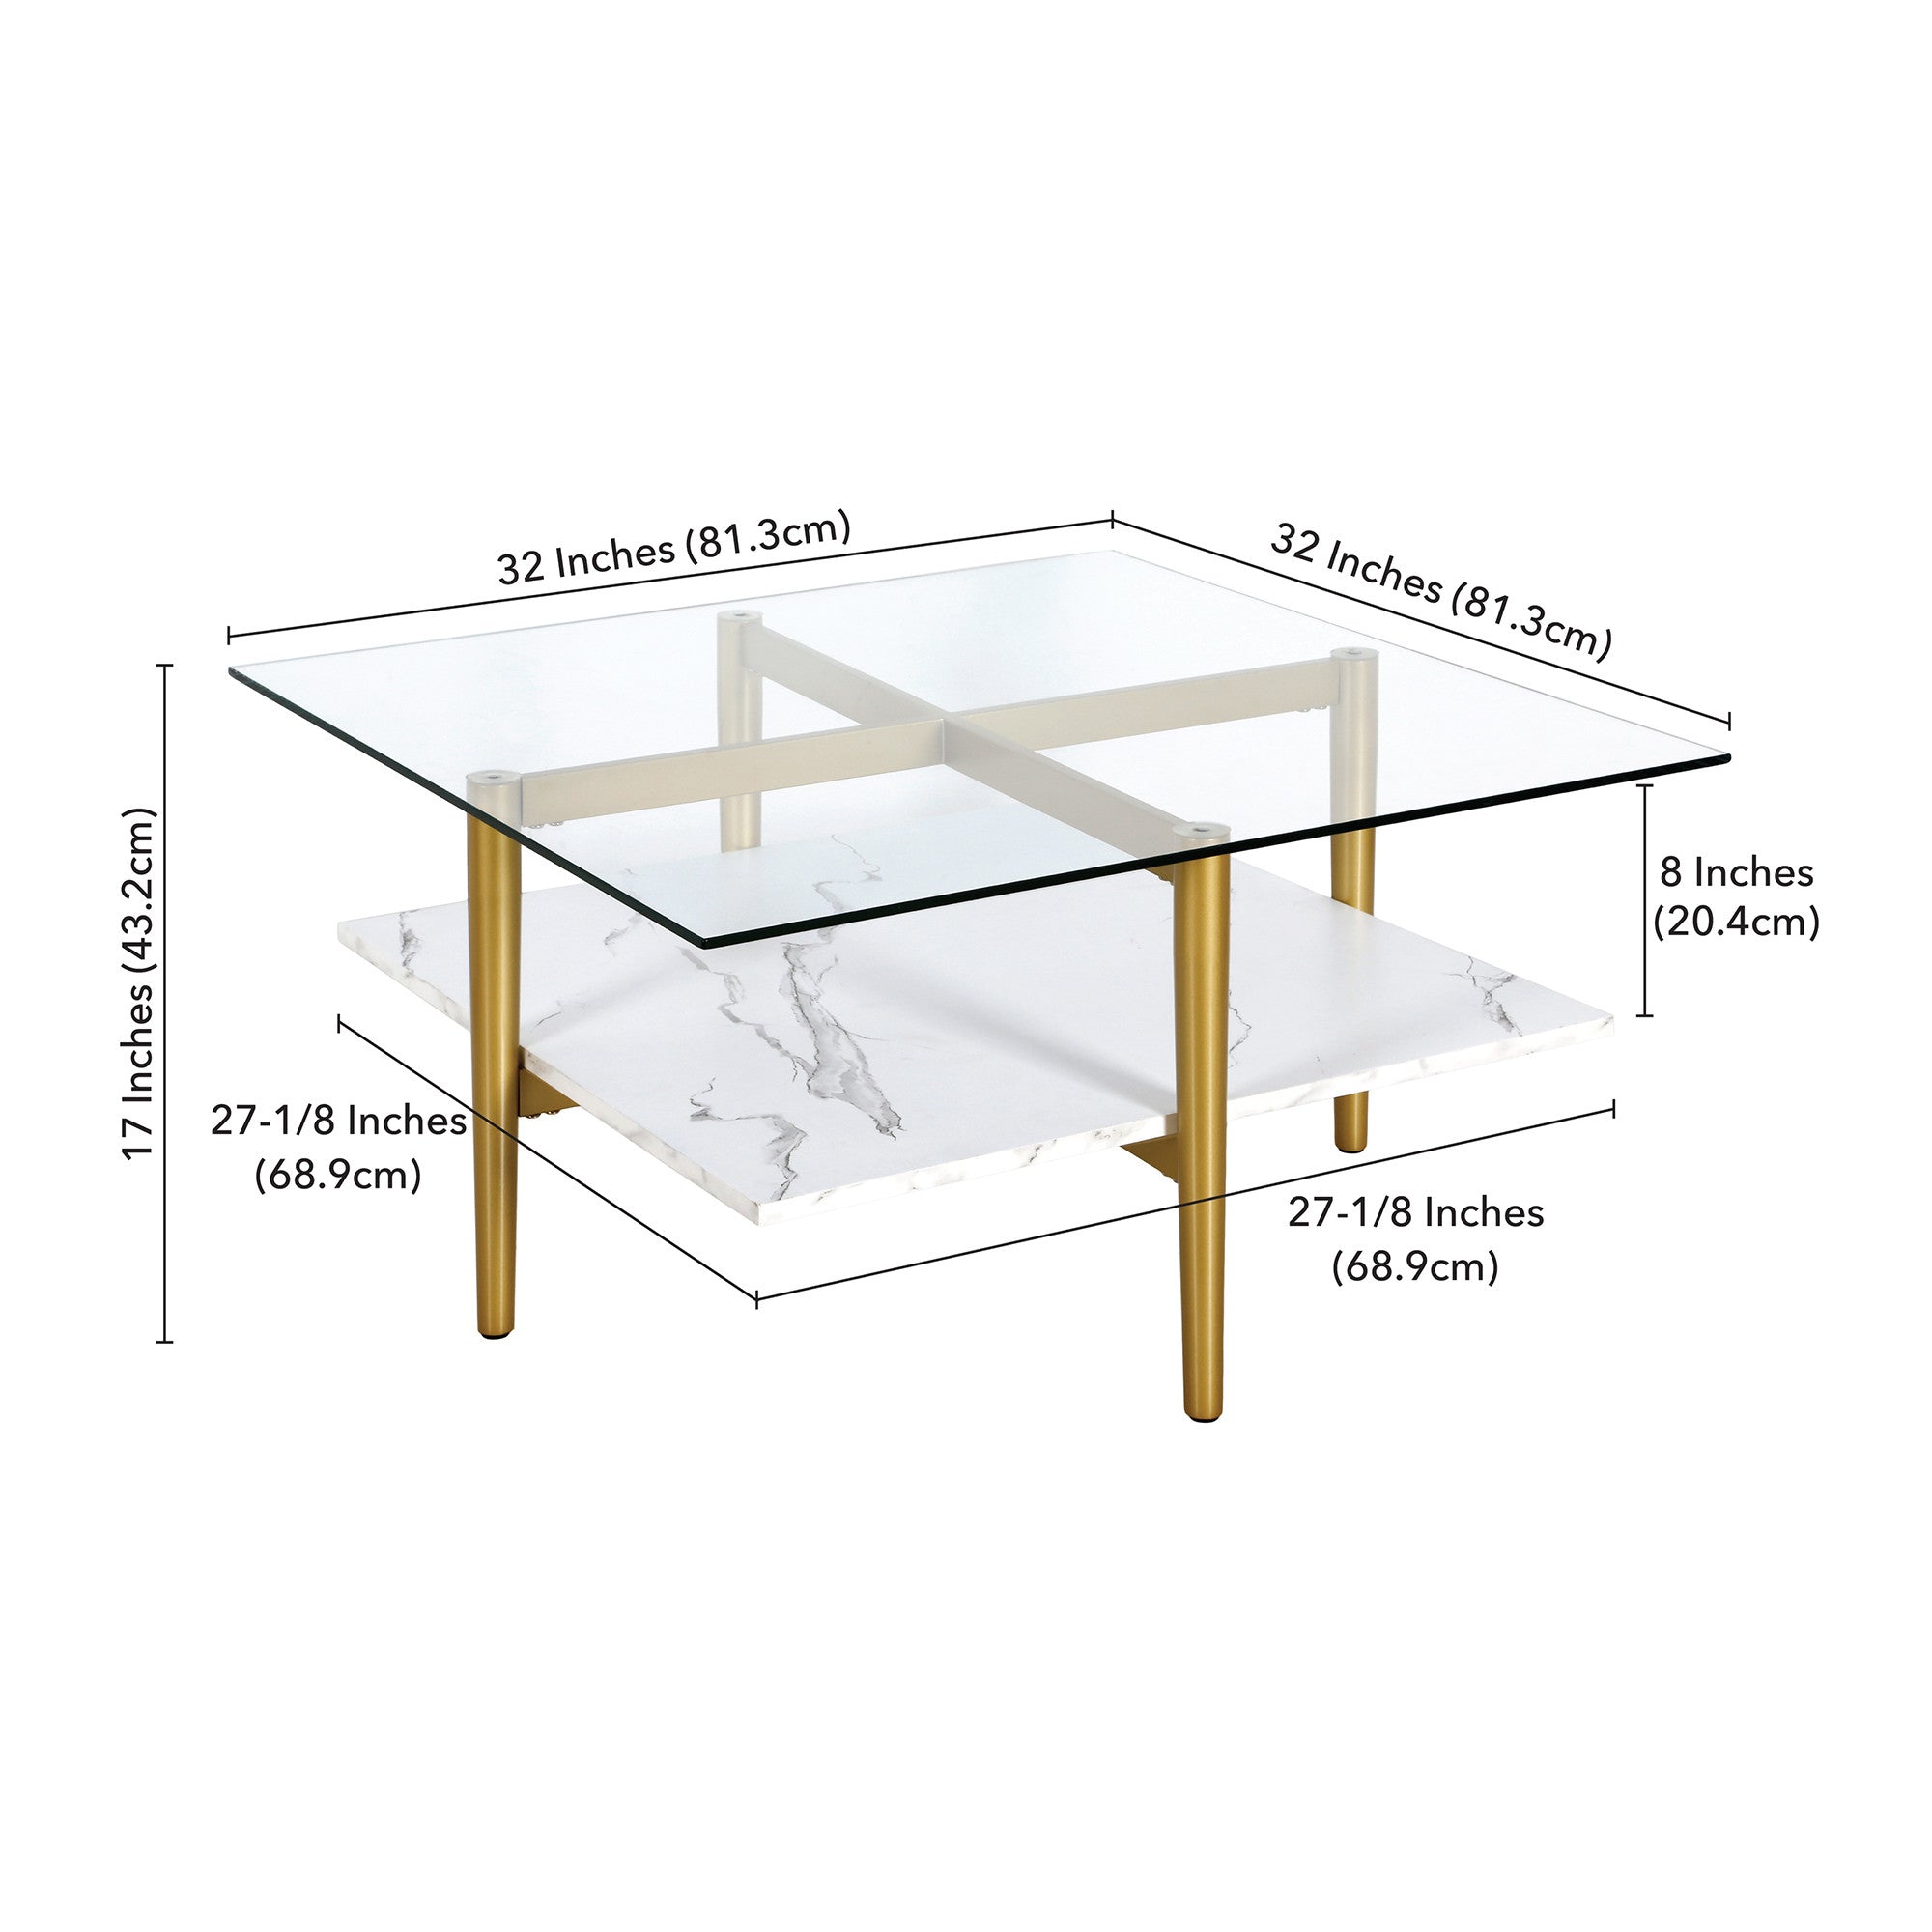 32" White And Gold Glass And Steel Square Coffee Table With Shelf